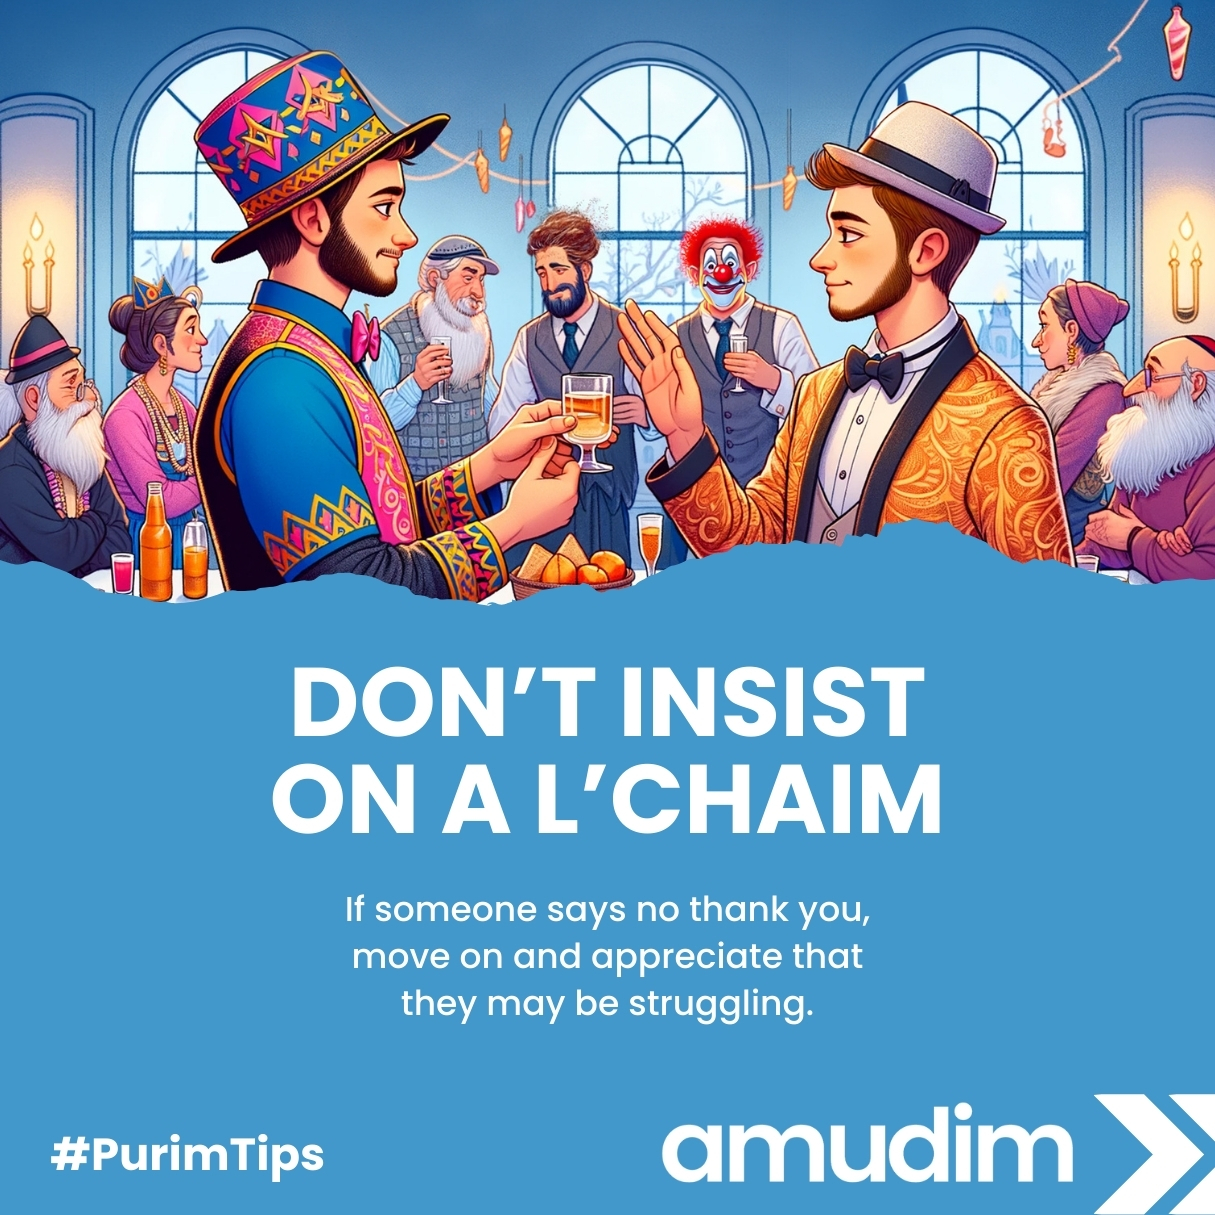 This Purim Don’t insist on a L’Chaim